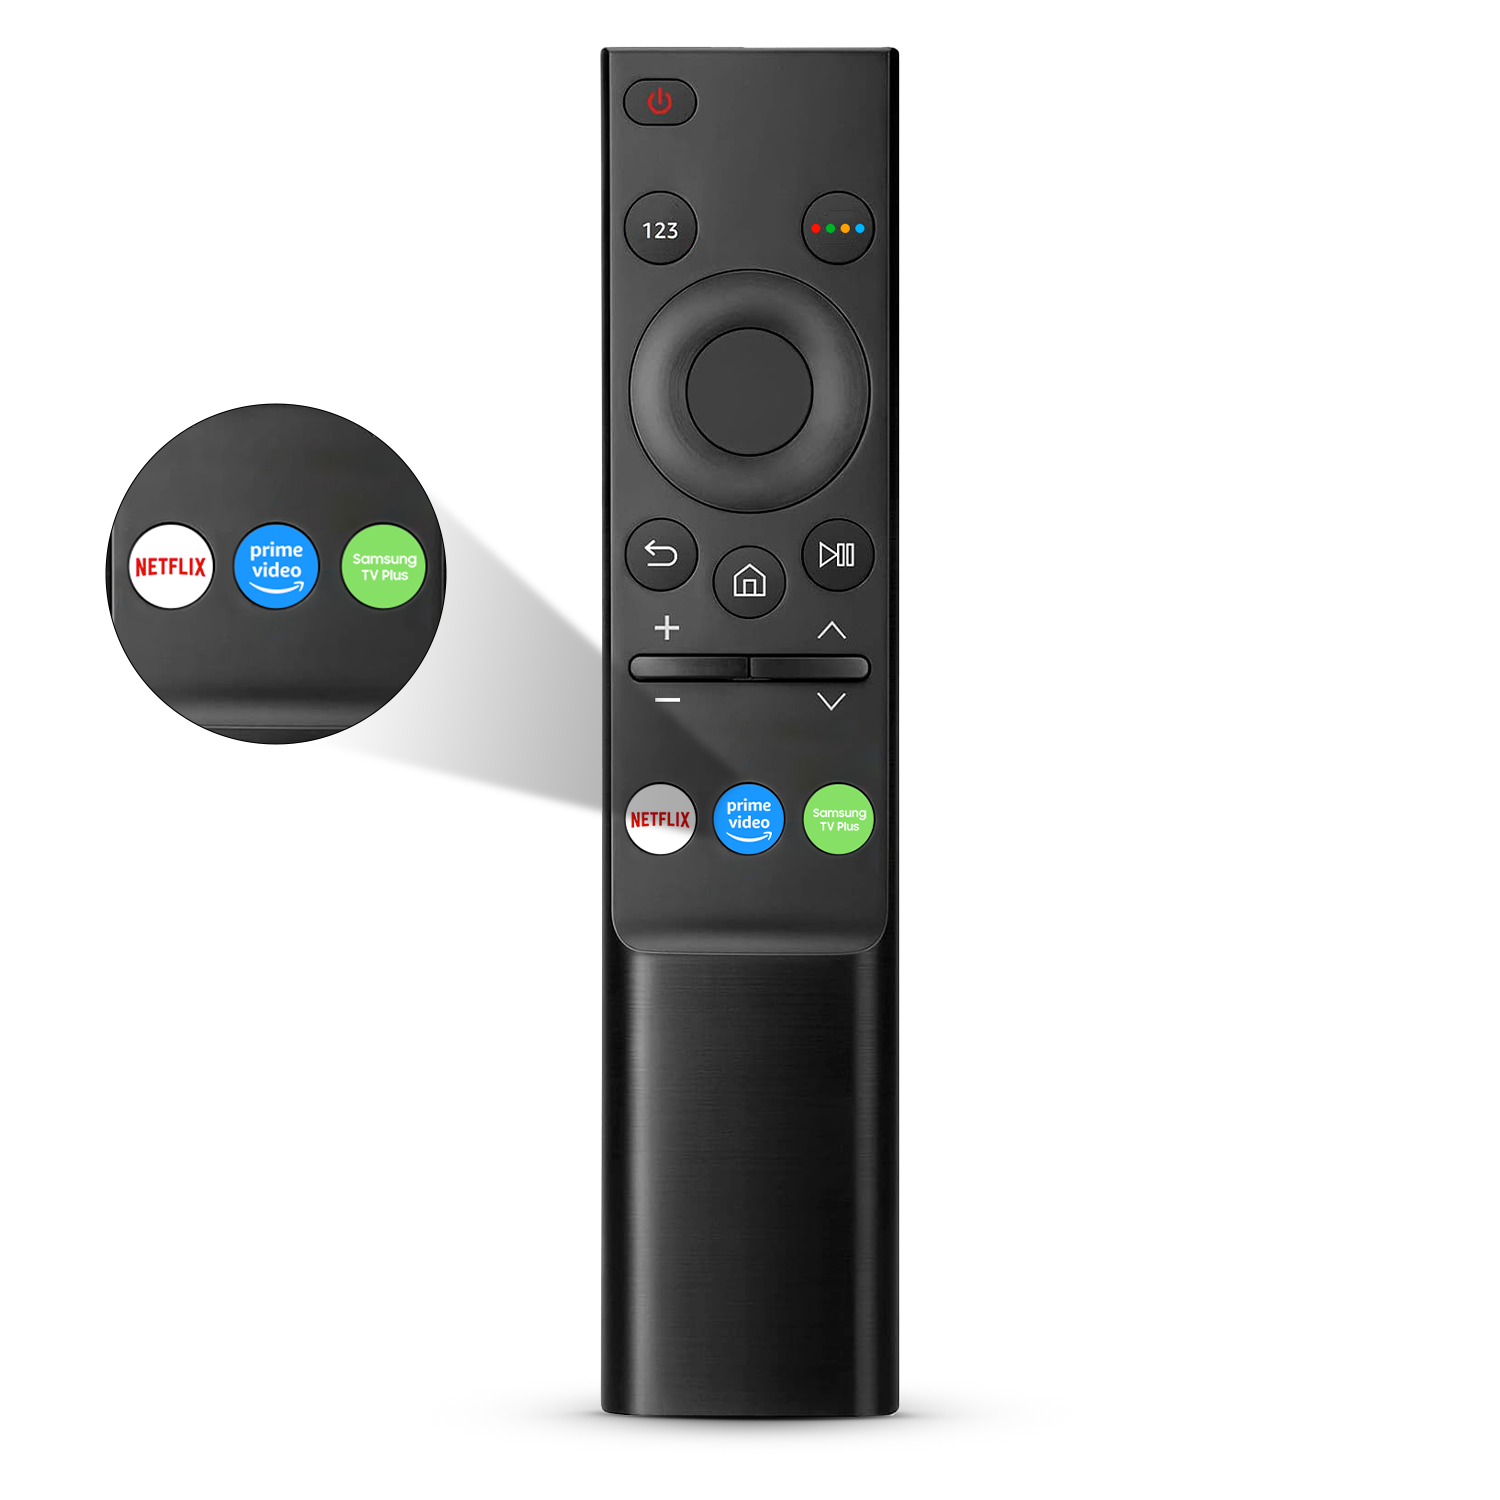 Universal Replacement Samsung-TV-Remote, Samsung Remote Compatible with All Samsung TVs - 1 Year Warranty Included (No Voice Control)